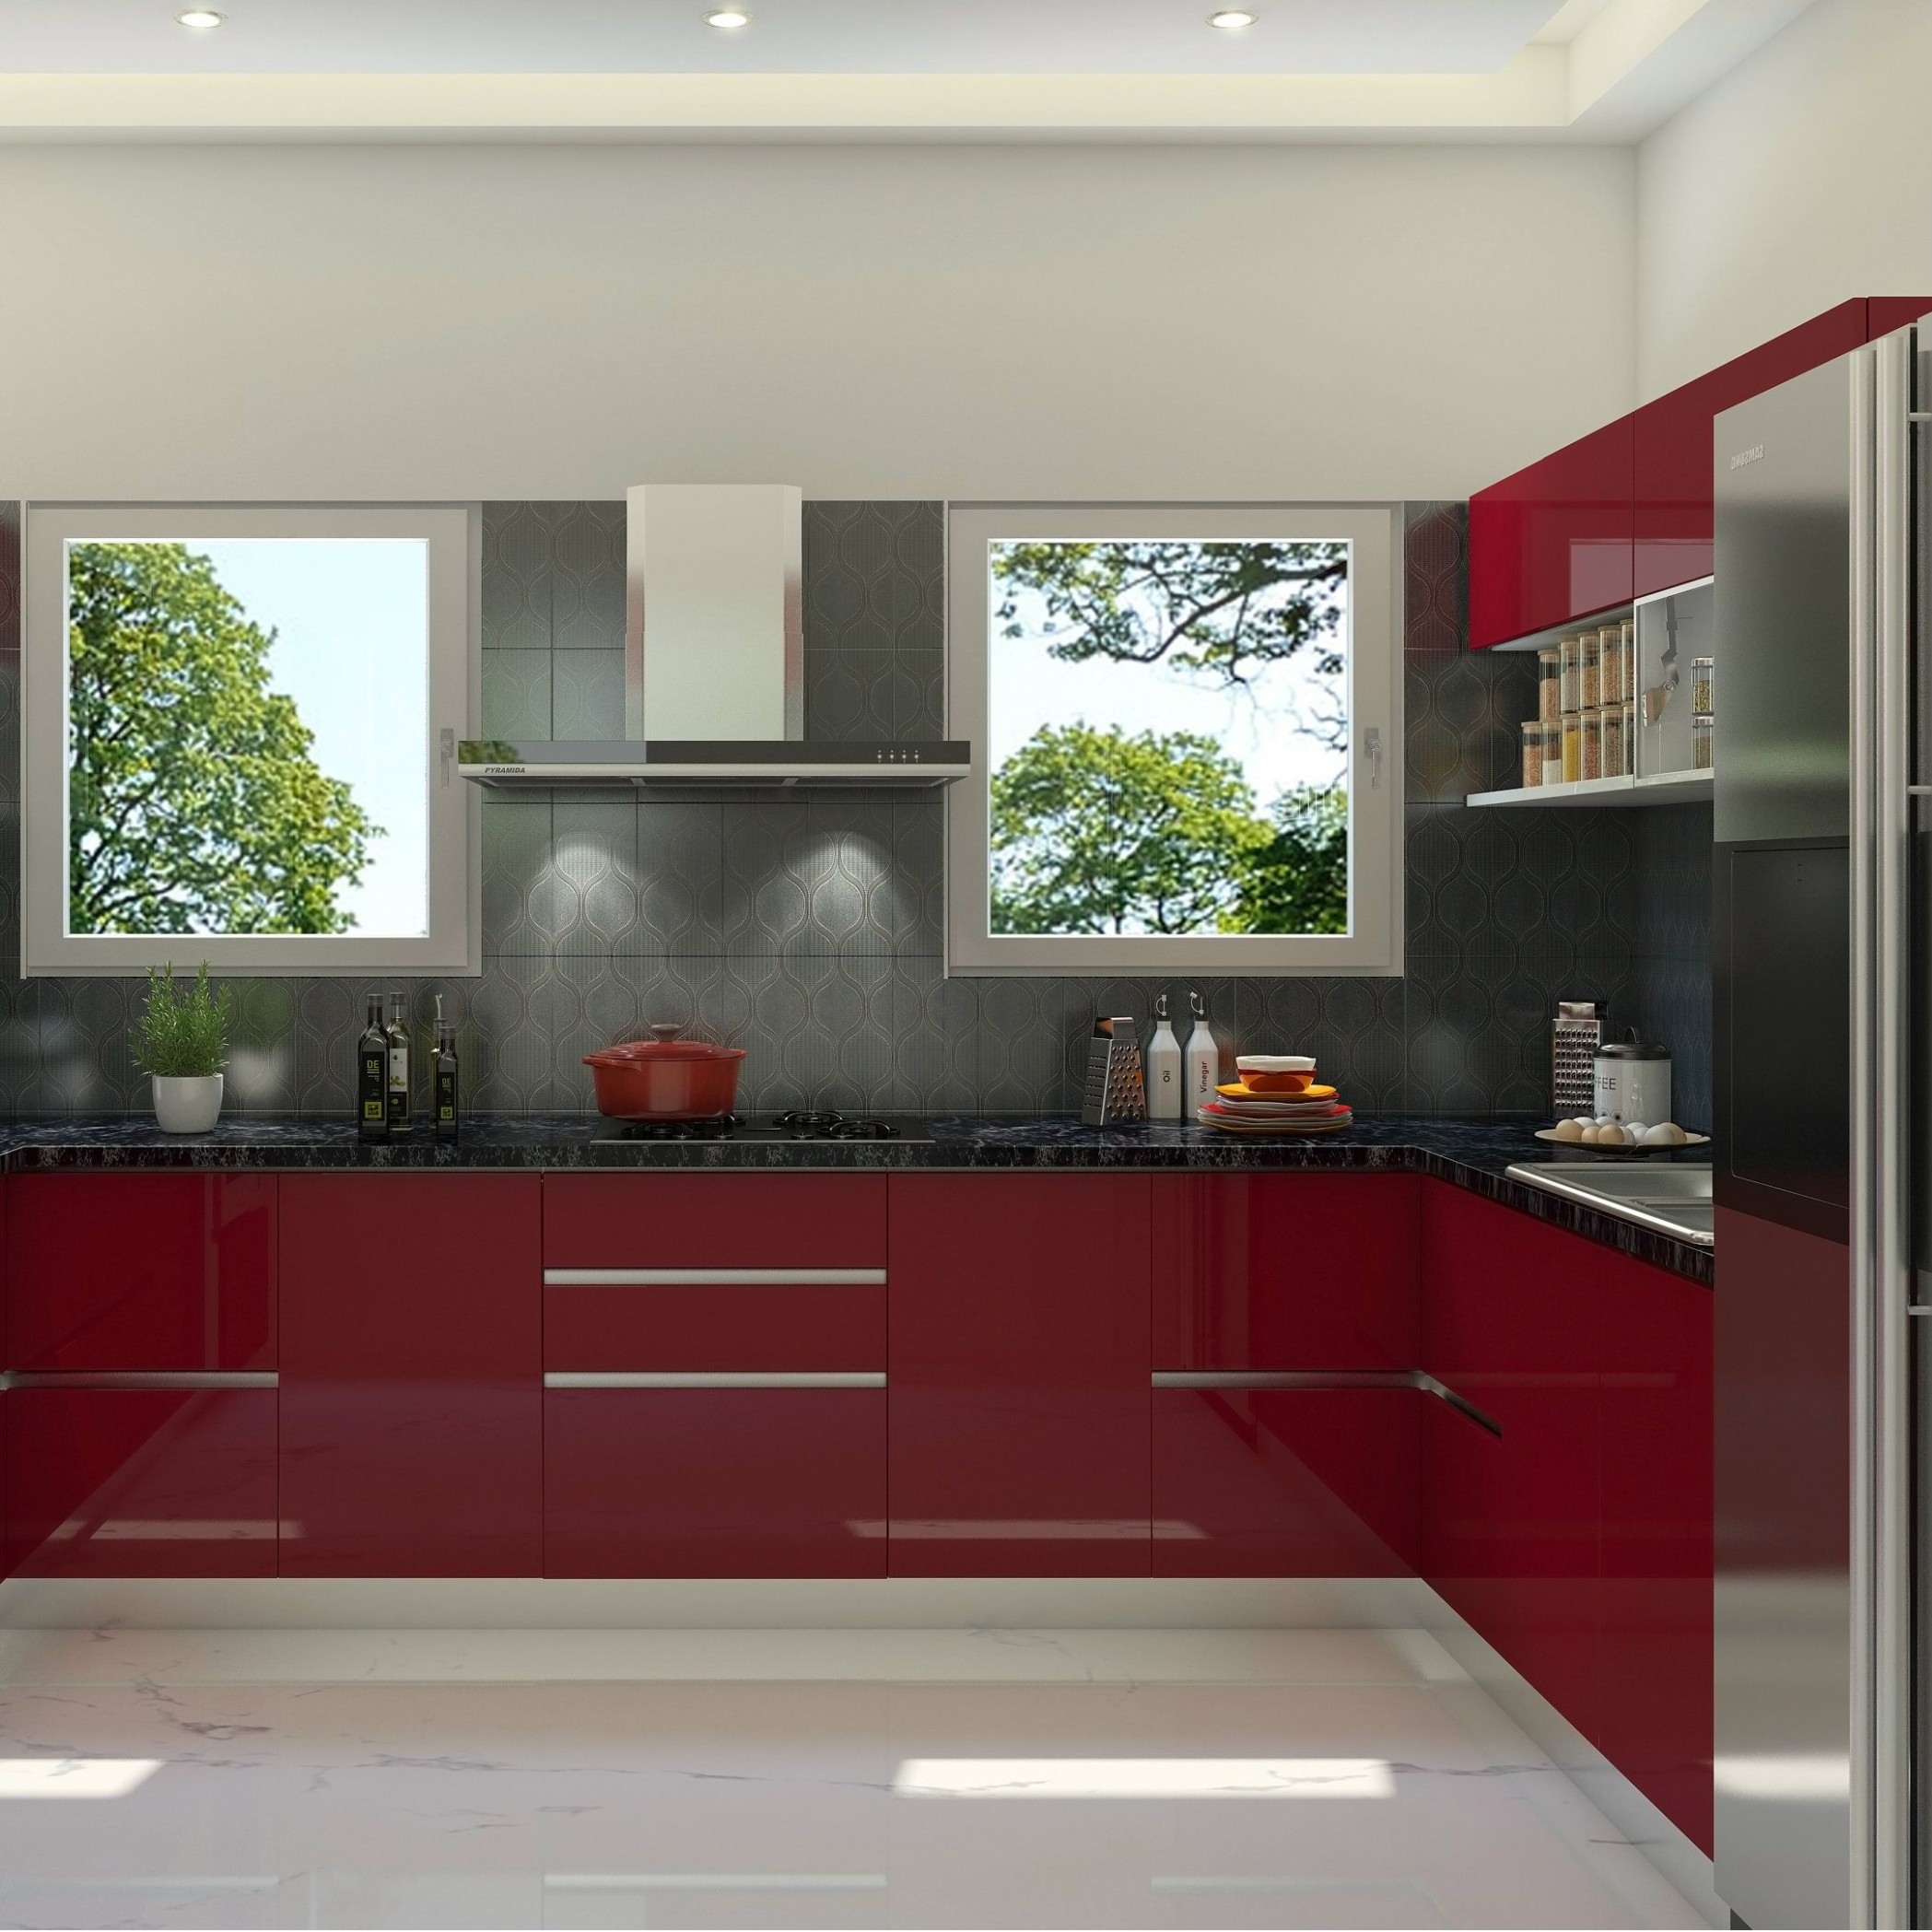 Glossy kitchen design, sleek finish, red and grey combination  - grey and red kitchen ideas